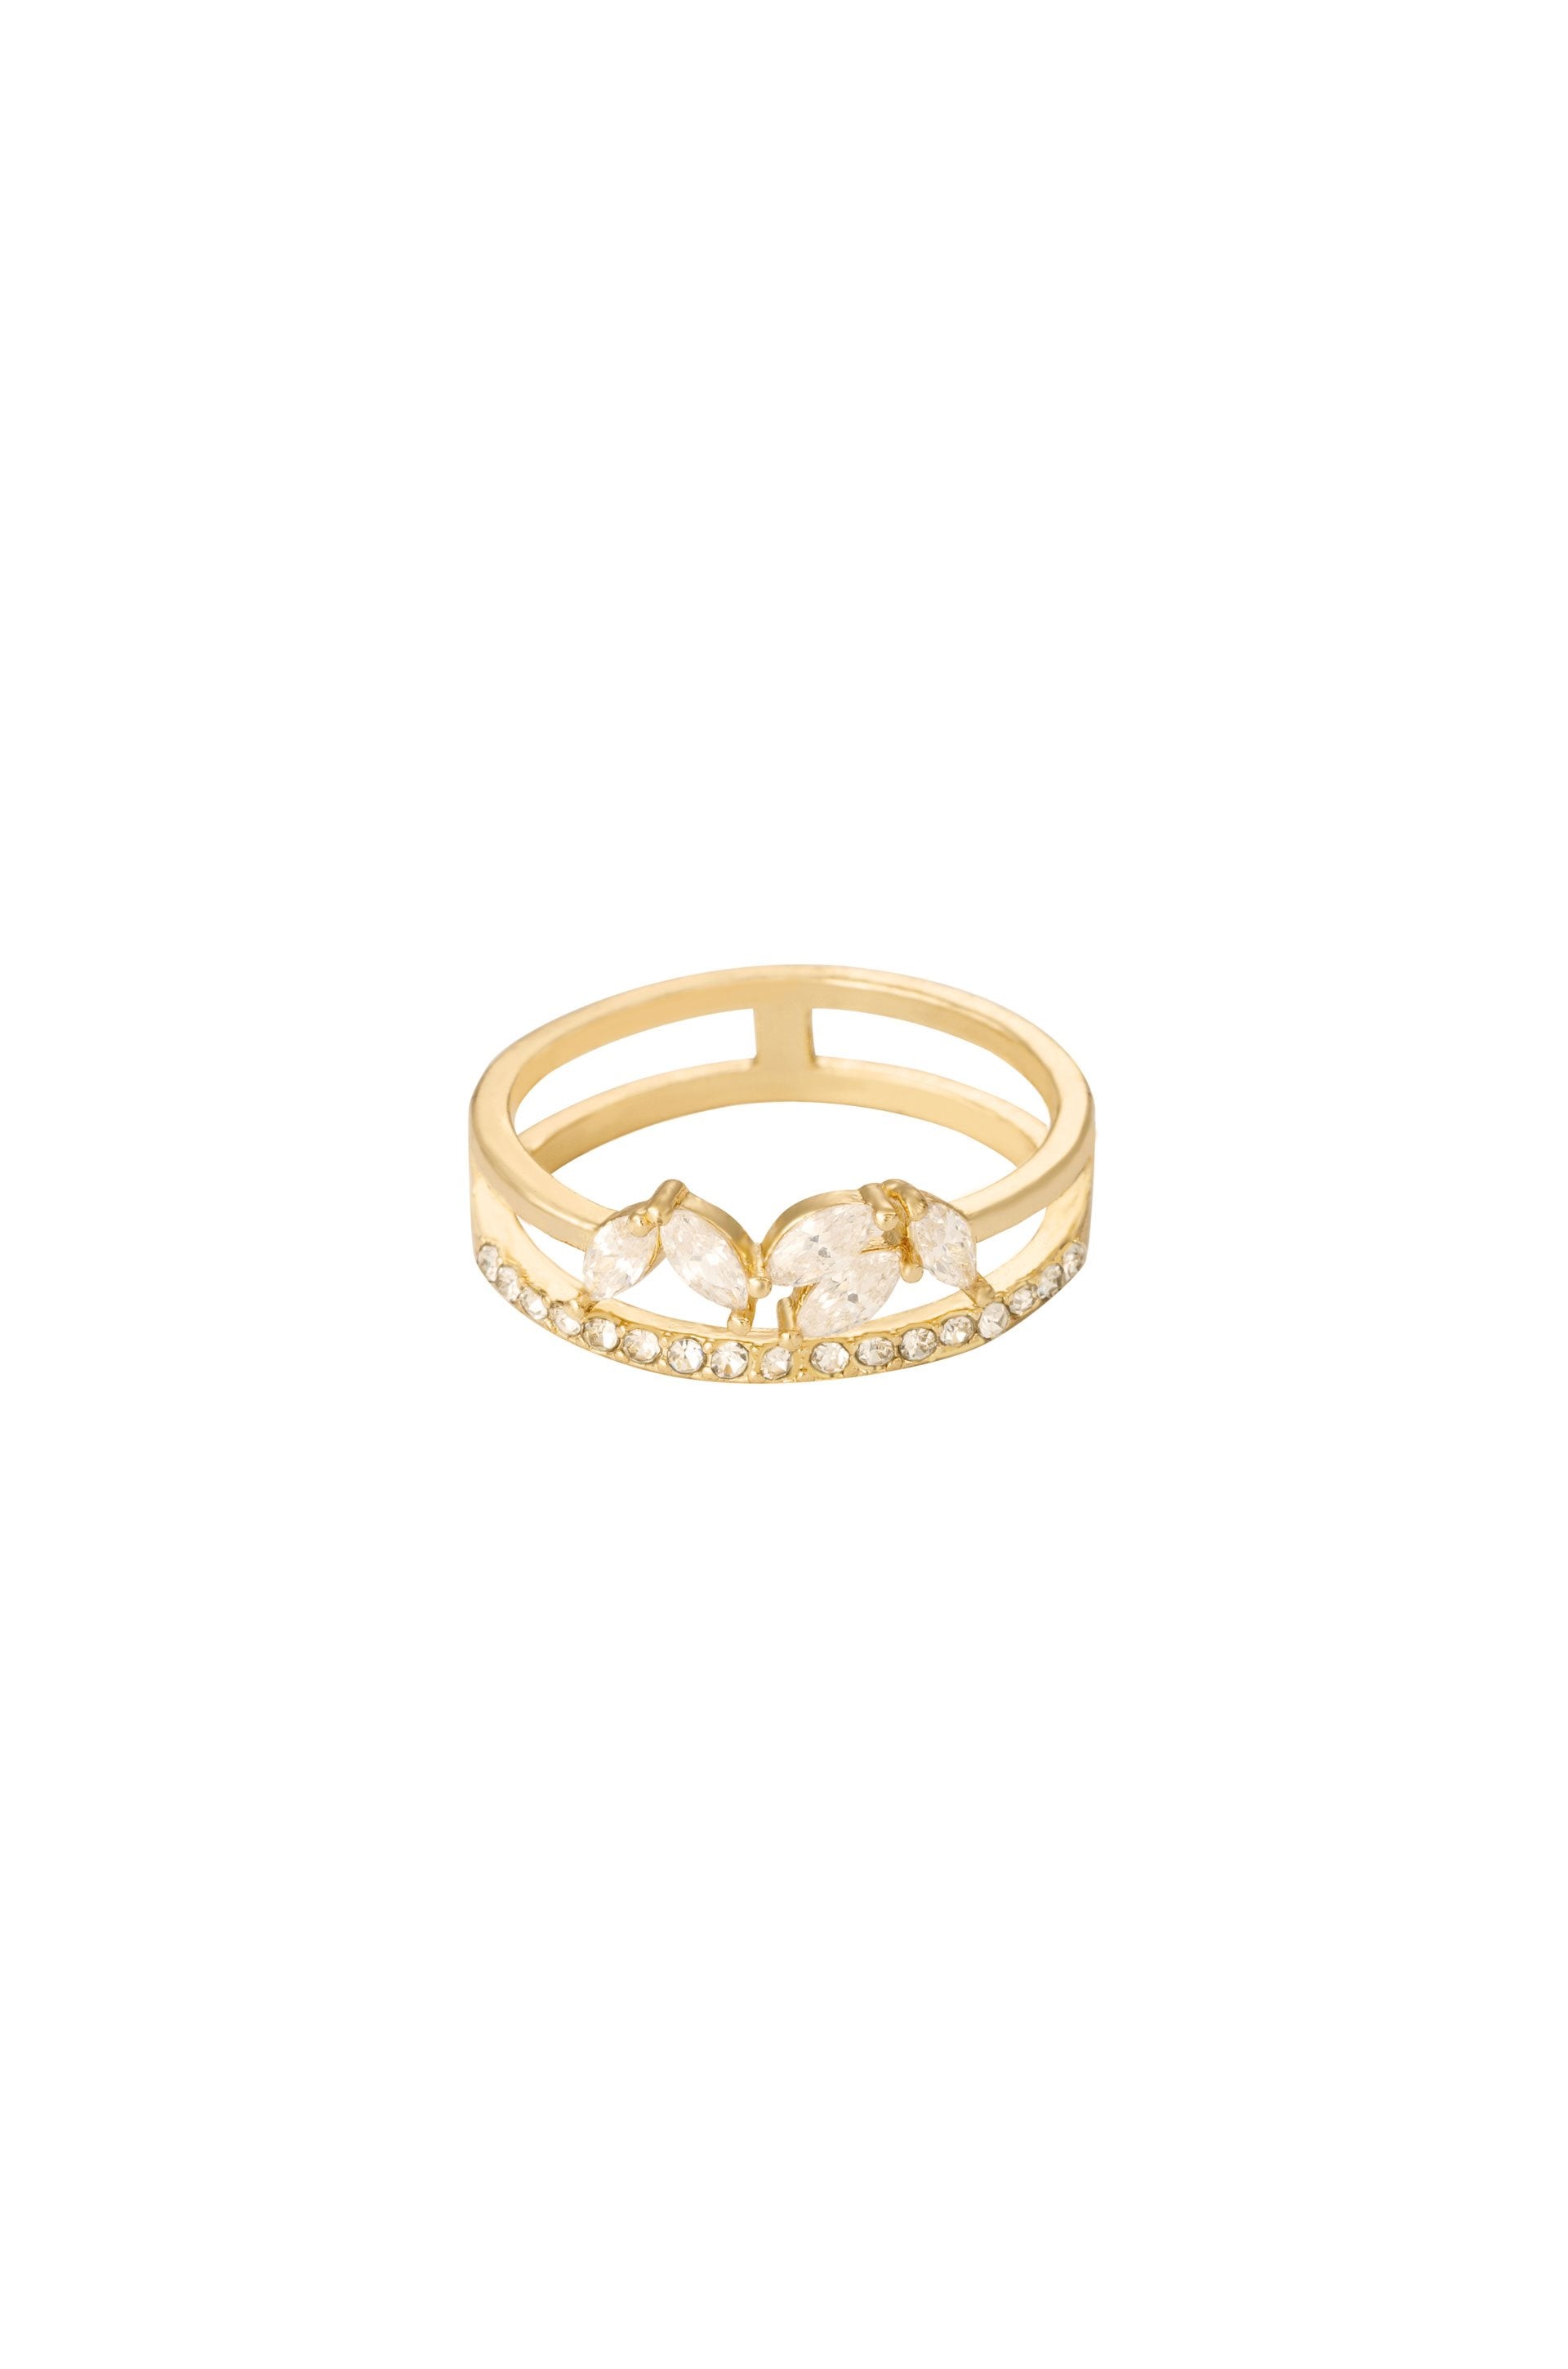 Crystal Double Illusion 18k Gold Plated Ring on white background  